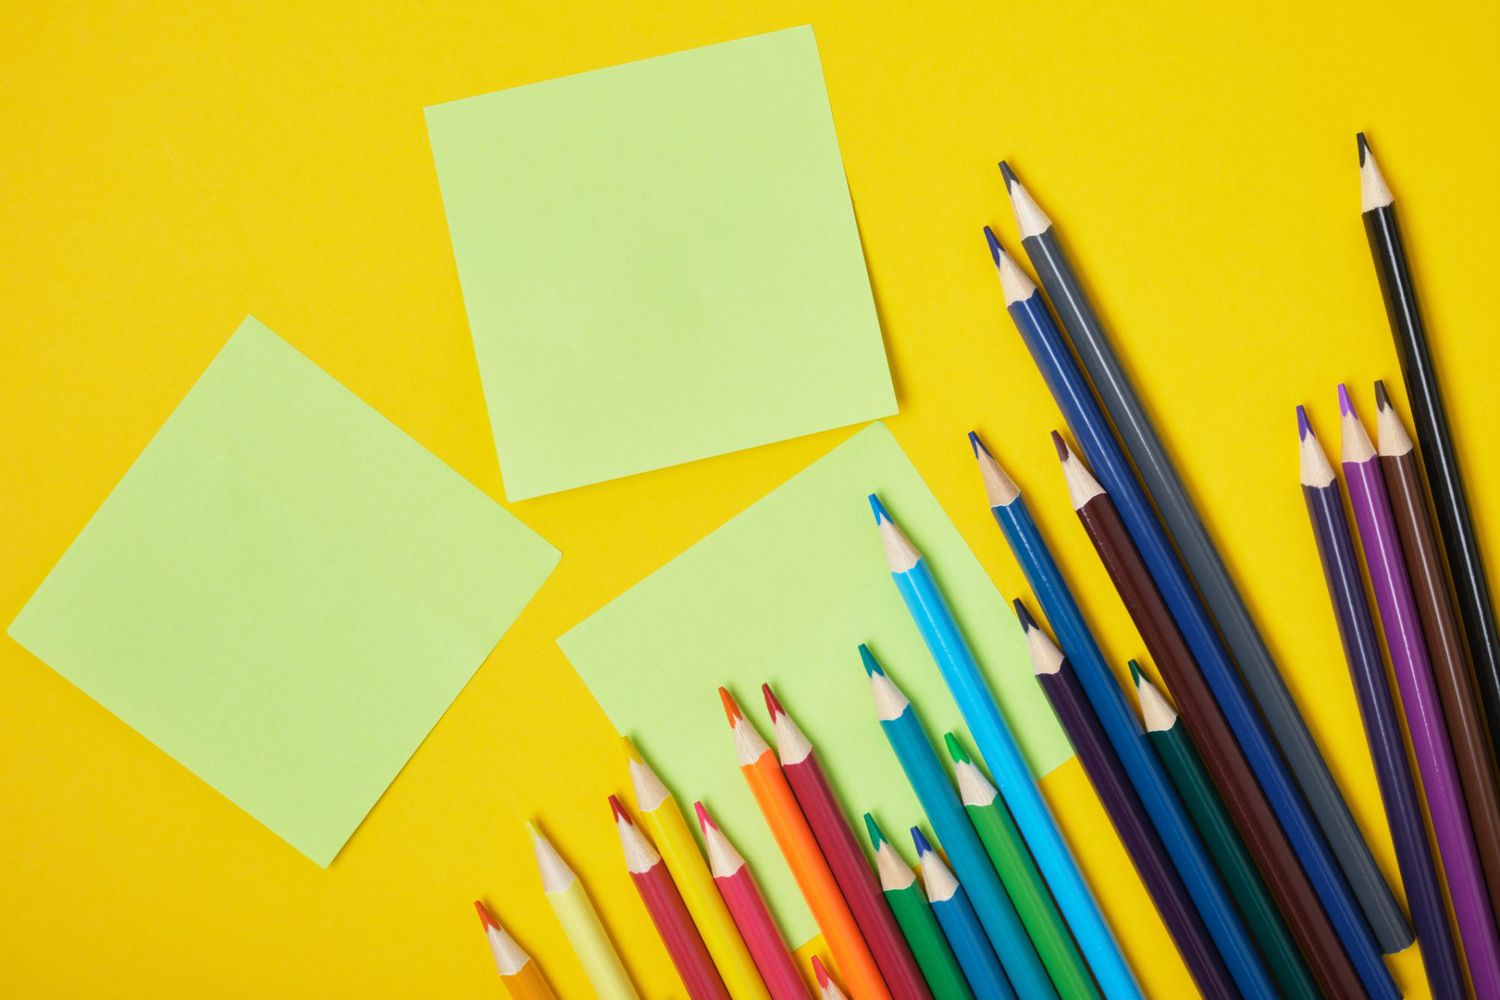 An image of colored pencils and sticky notes on a yellow background.